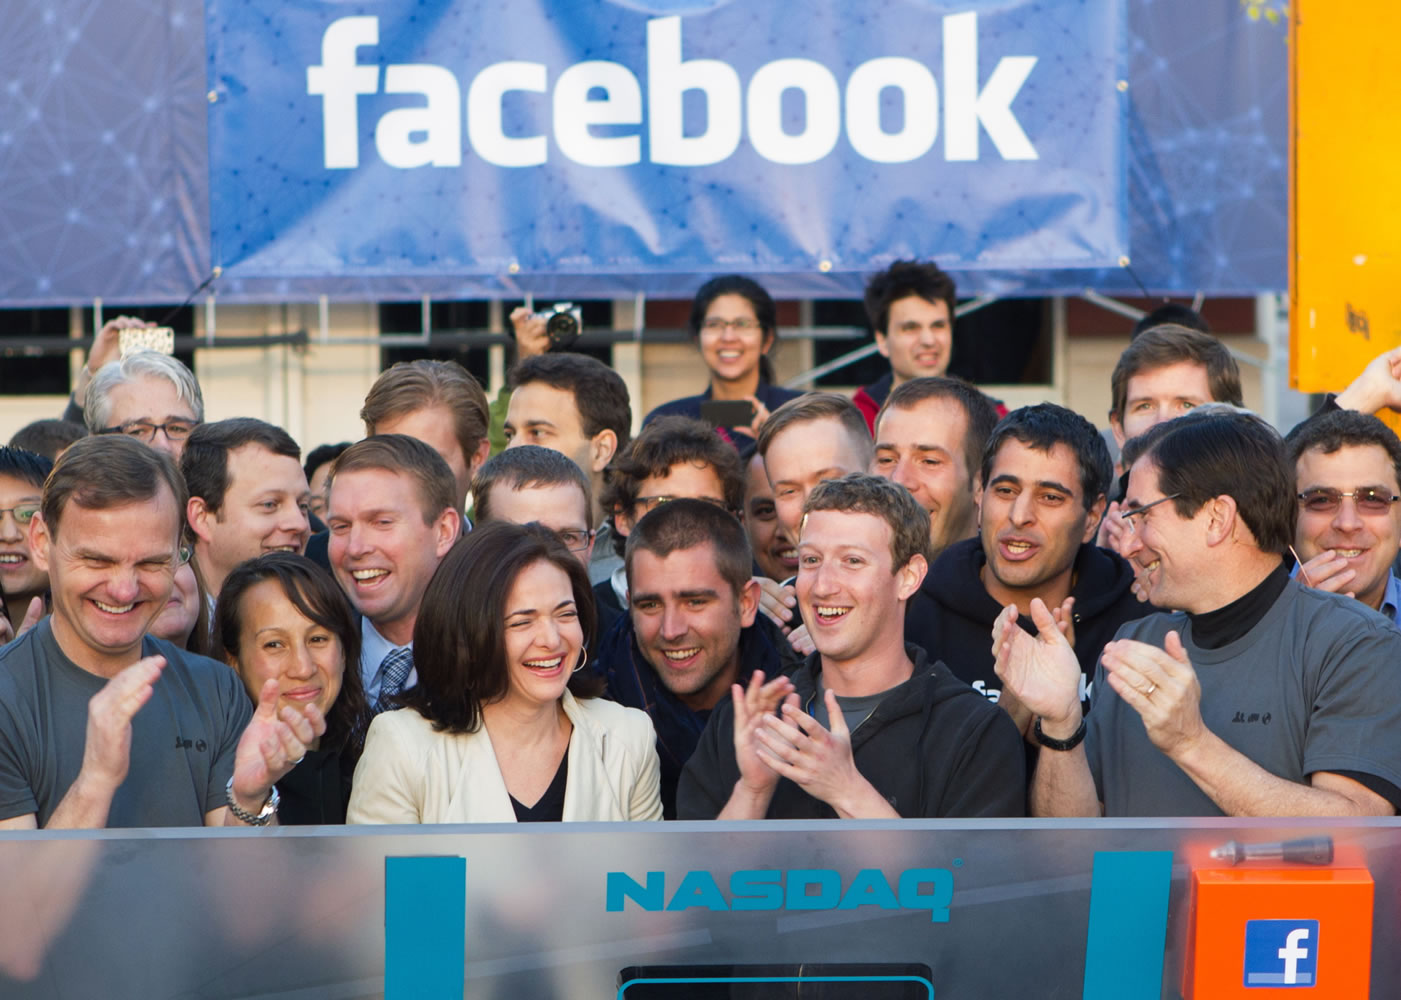 Facebook founder, Chairman and CEO Mark Zuckerberg, center, applauds at the opening bell of the Nasdaq stock market Friday from Facebook headquarters in Menlo Park, Calif., as the social networking giant launched its IPO.